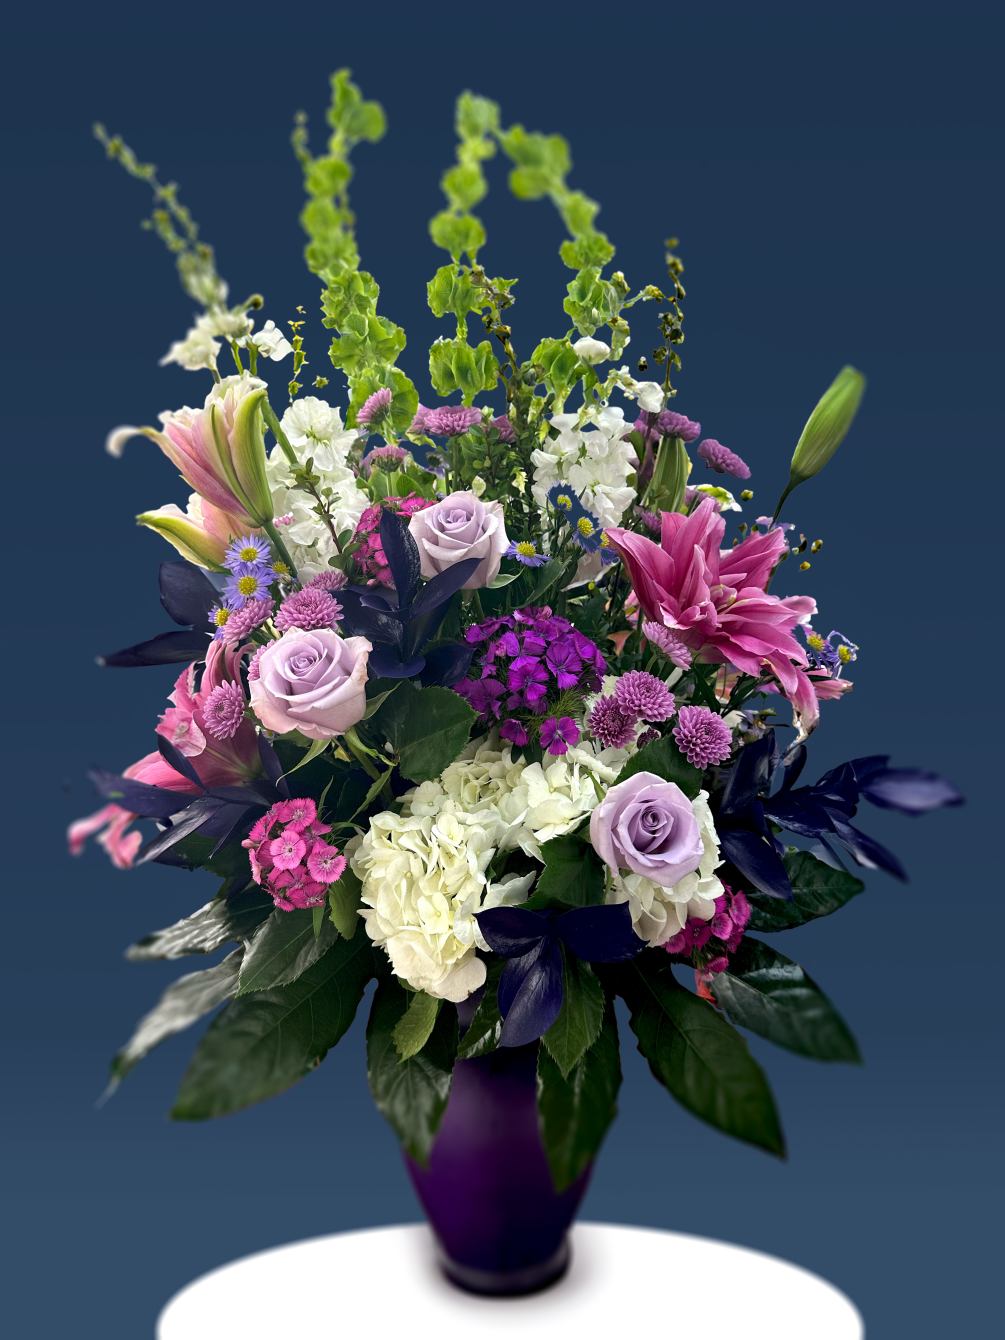 Rich and elegant. A collection of purple and hot pink flowers composed